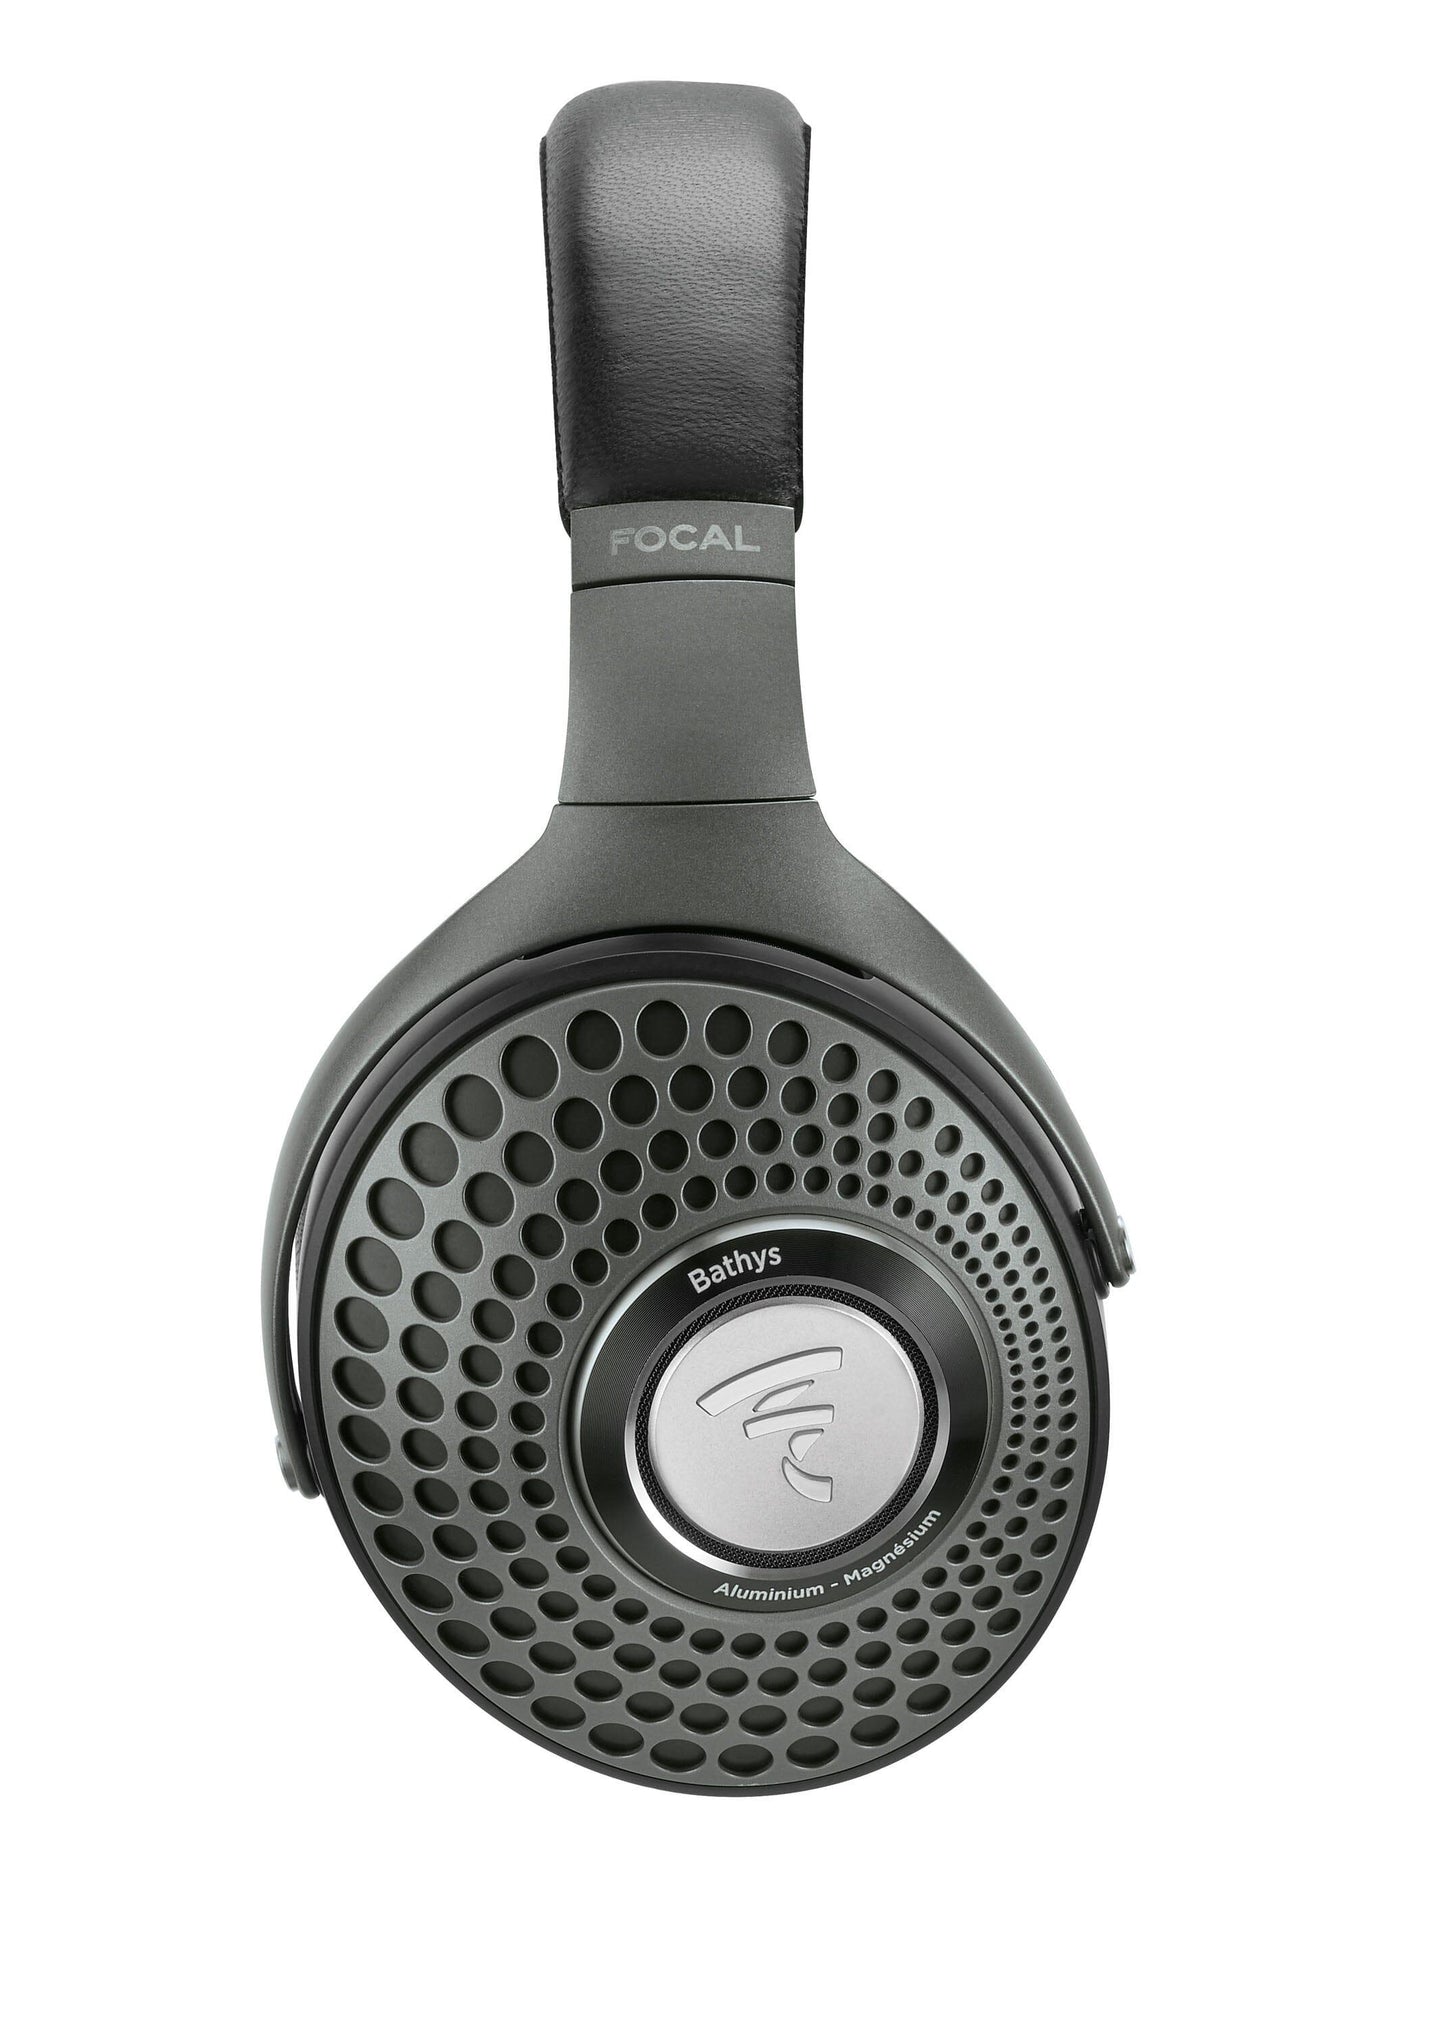 Right-side view of Focal Bathys wireless noise-cancelling bluetooth hifi headphones